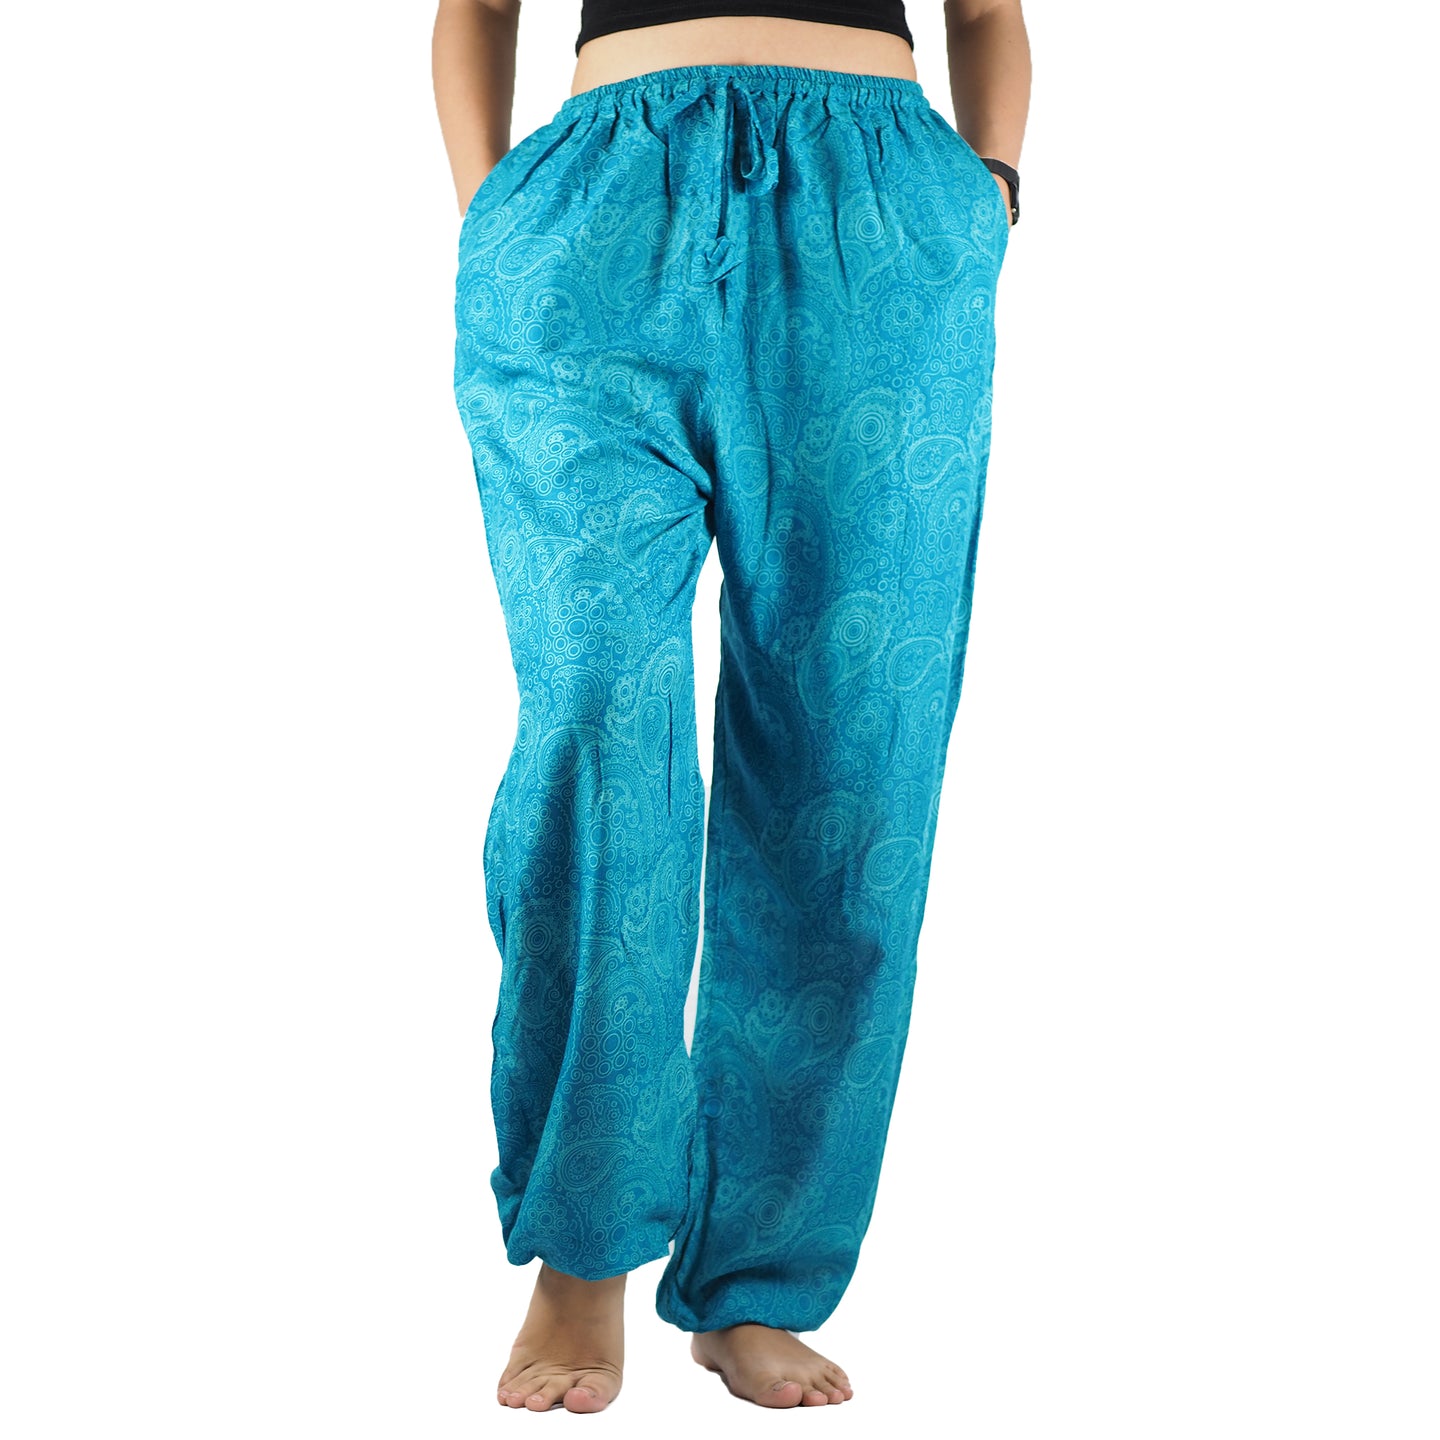 Paisley Mistery Unisex Drawstring Genie Pants in Blue PP0110 020016 04